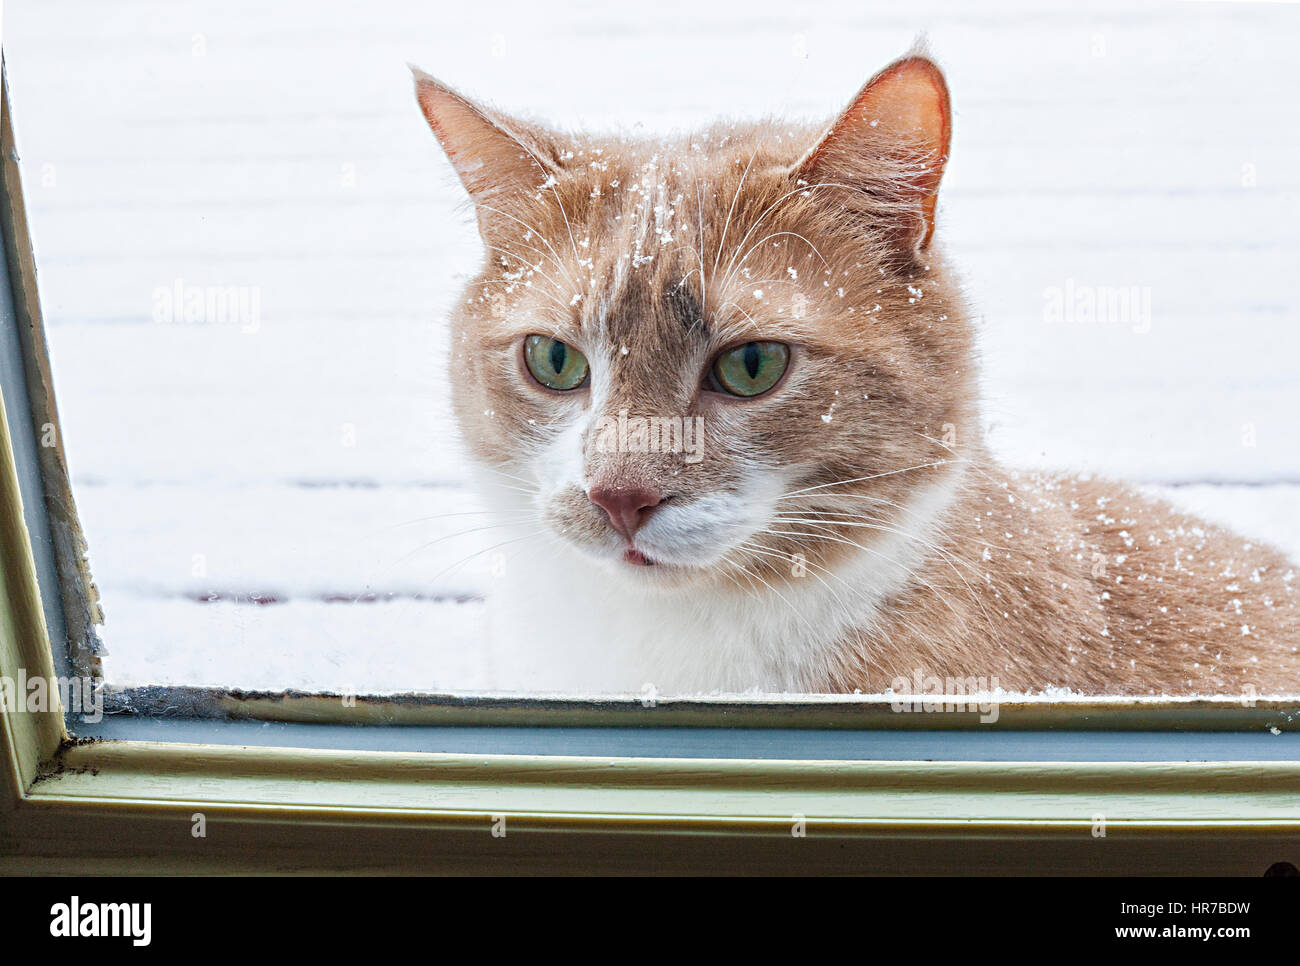 Cat sitting in front of glass door and waiting to come into the house Stock Photo